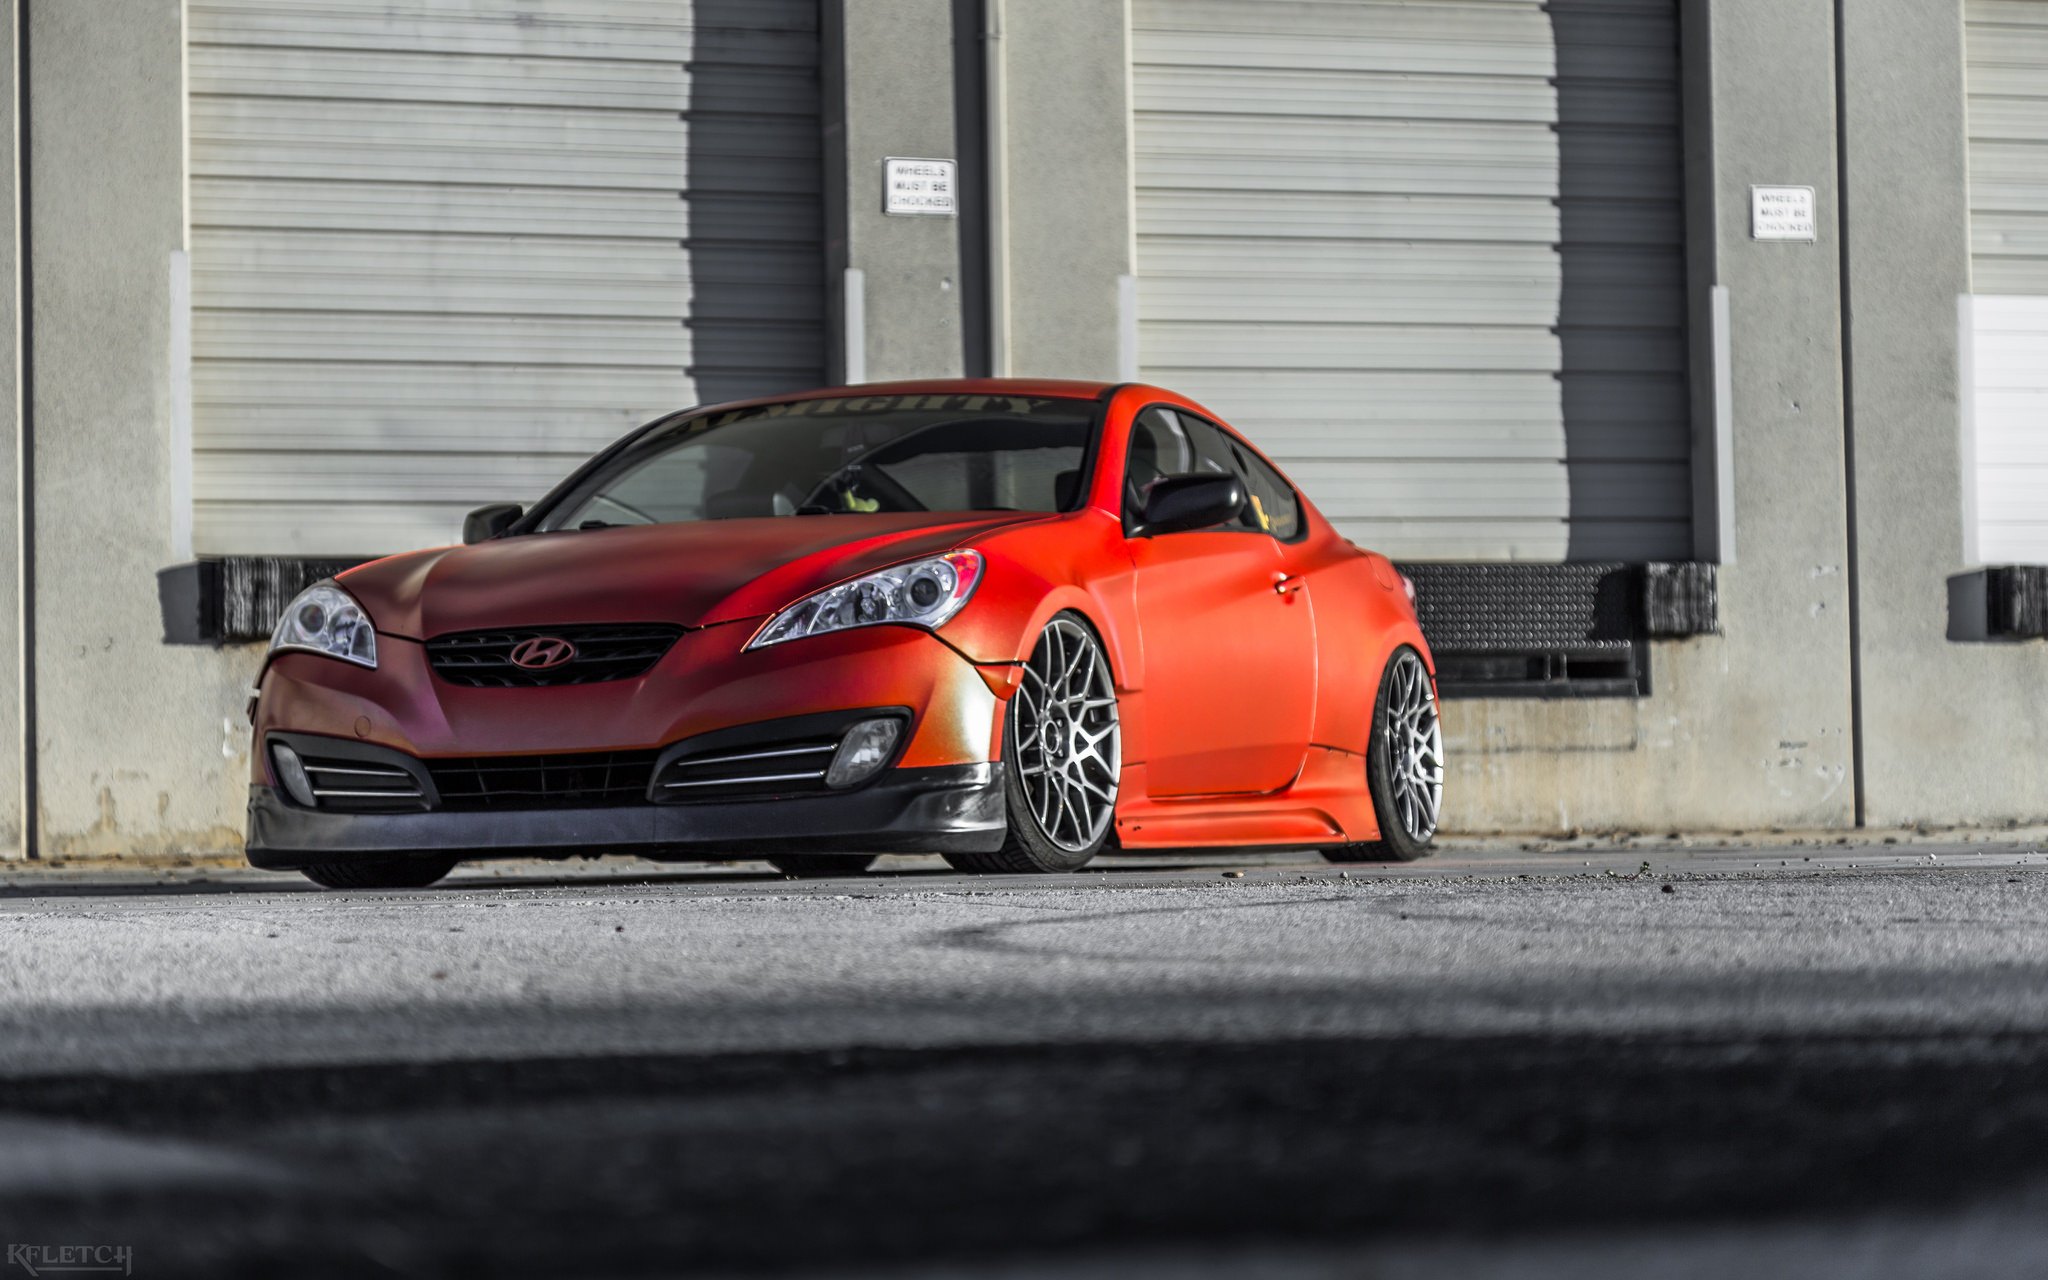 Aftermarket Hood on Red Hyundai Genesis Coupe - Photo by kyle Fletcher